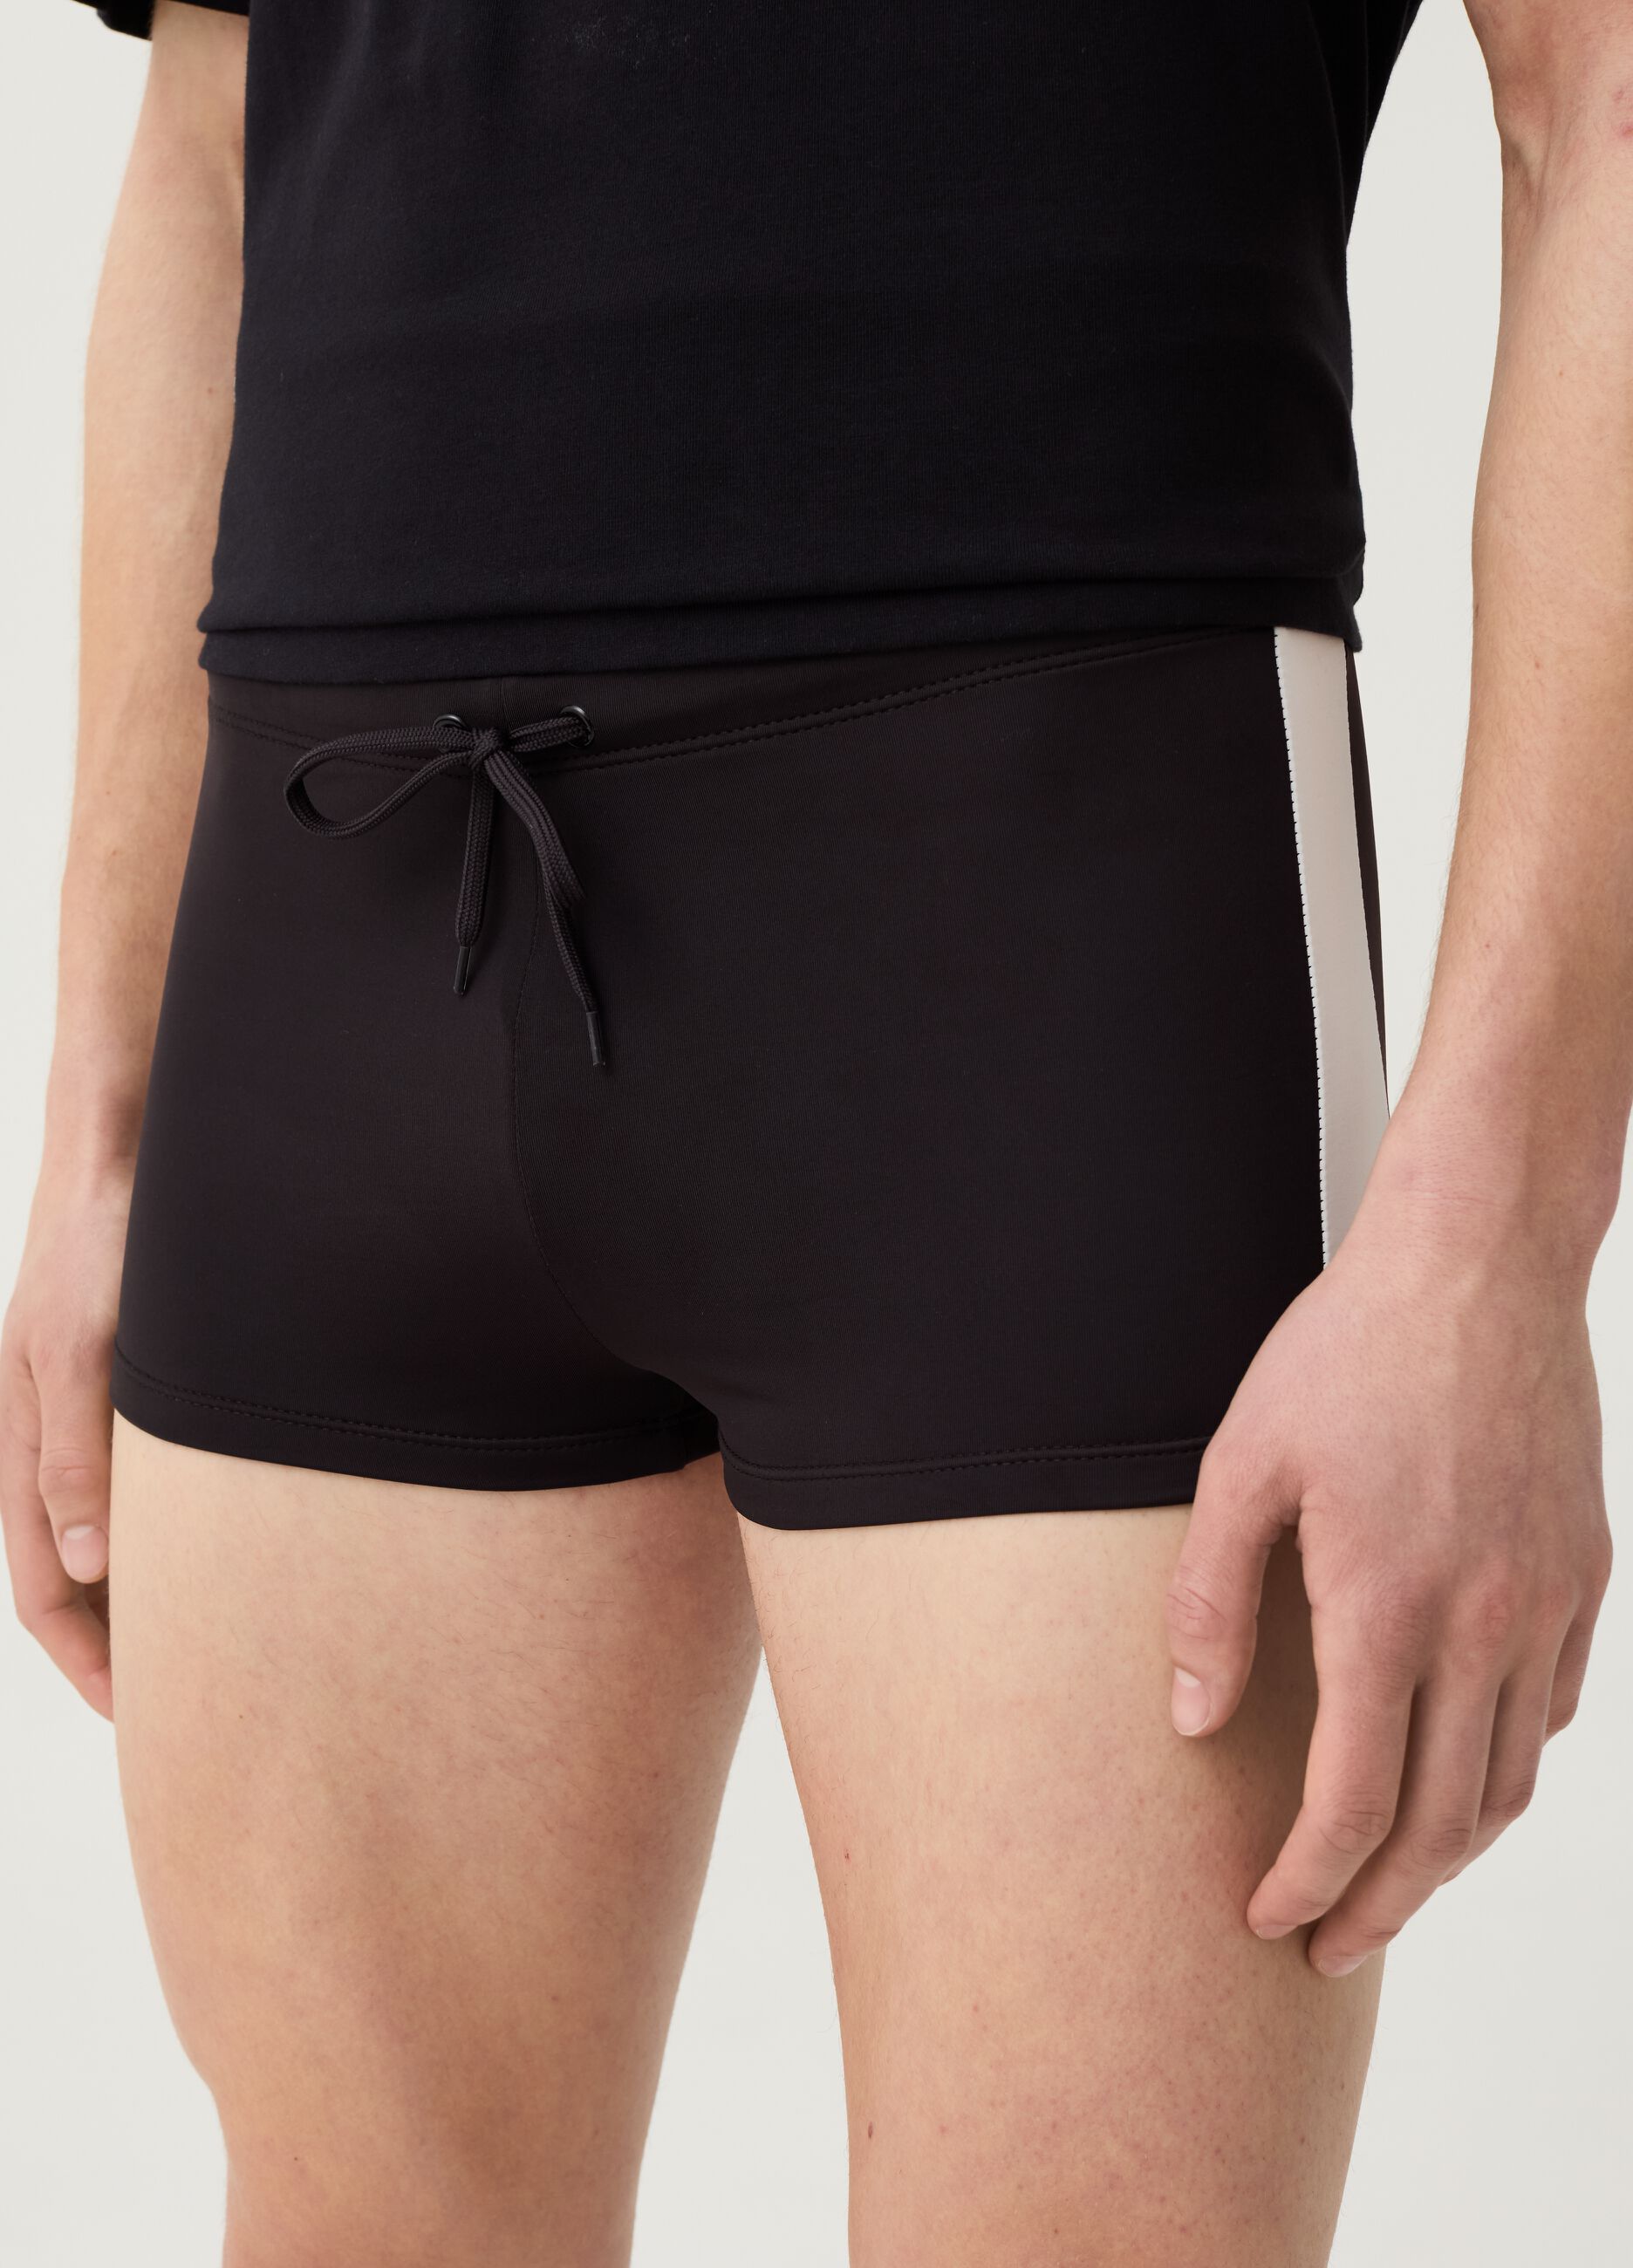 Swimming trunks with side bands